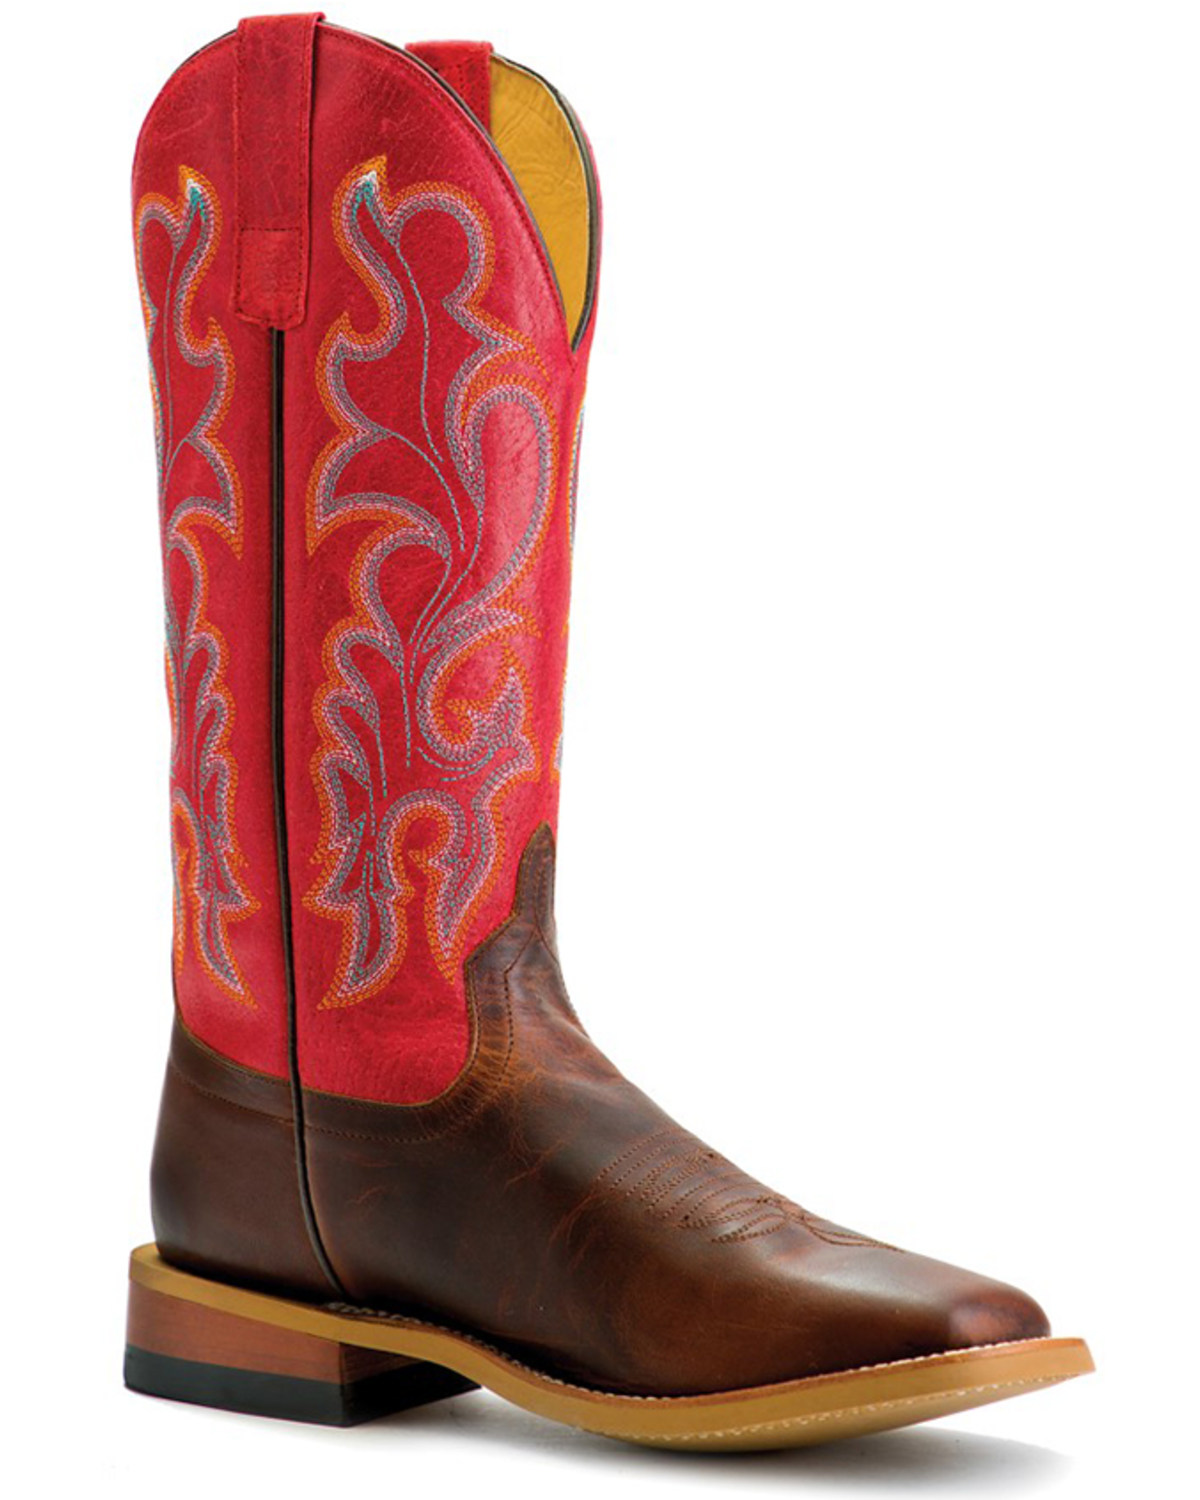 Macie Bean Women's Old Town Road Western Boots - Broad Square Toe